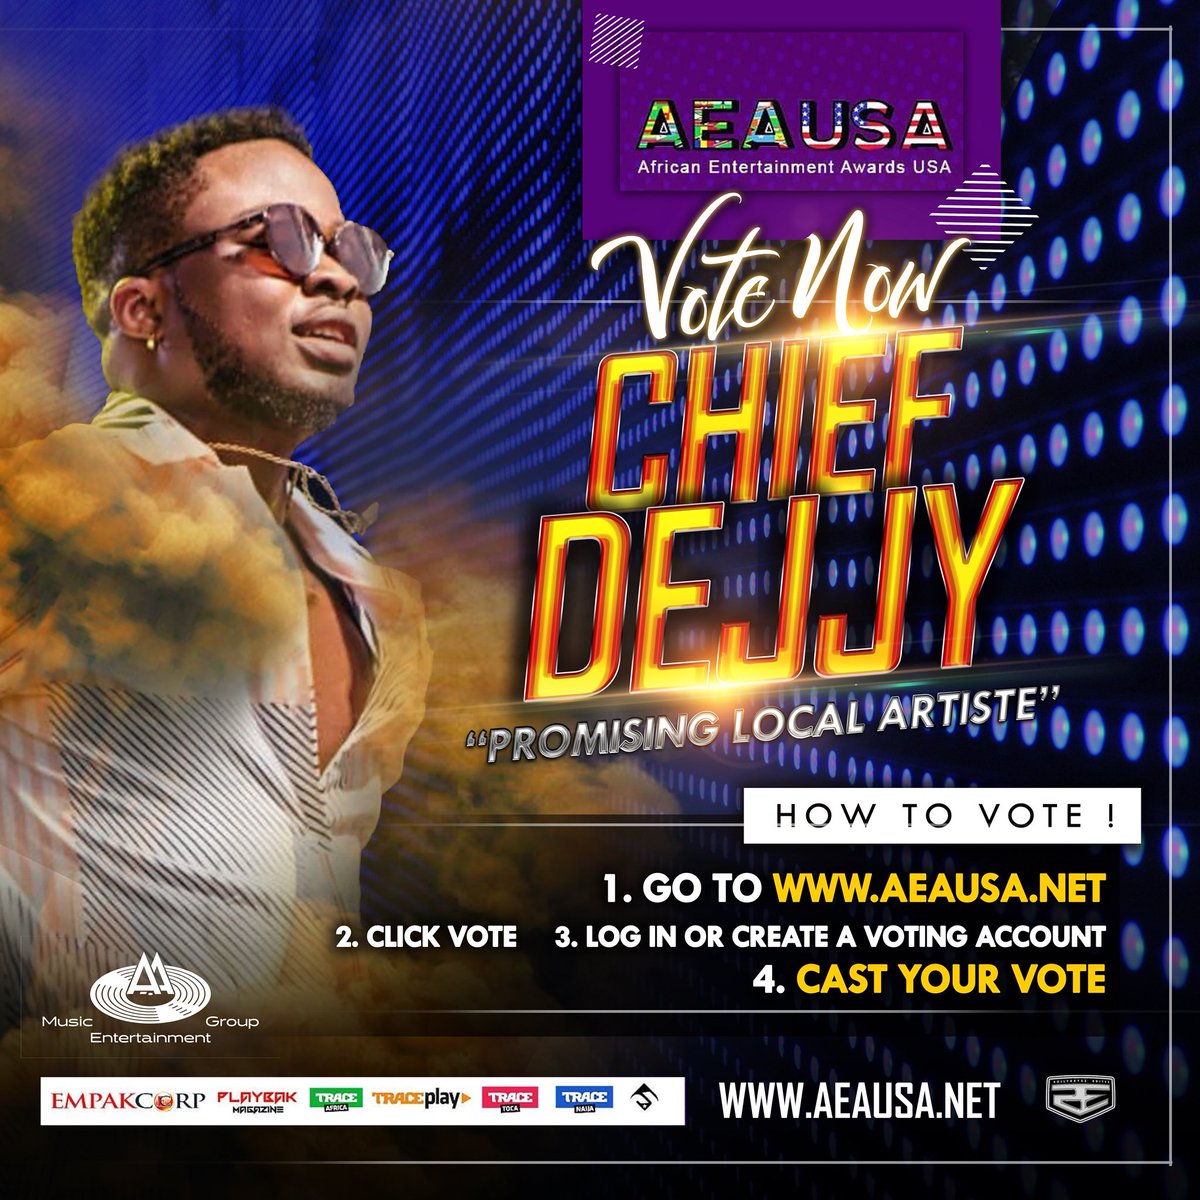 Chief Dejjy earns nomination at 2018 African Entertainment Awards USA